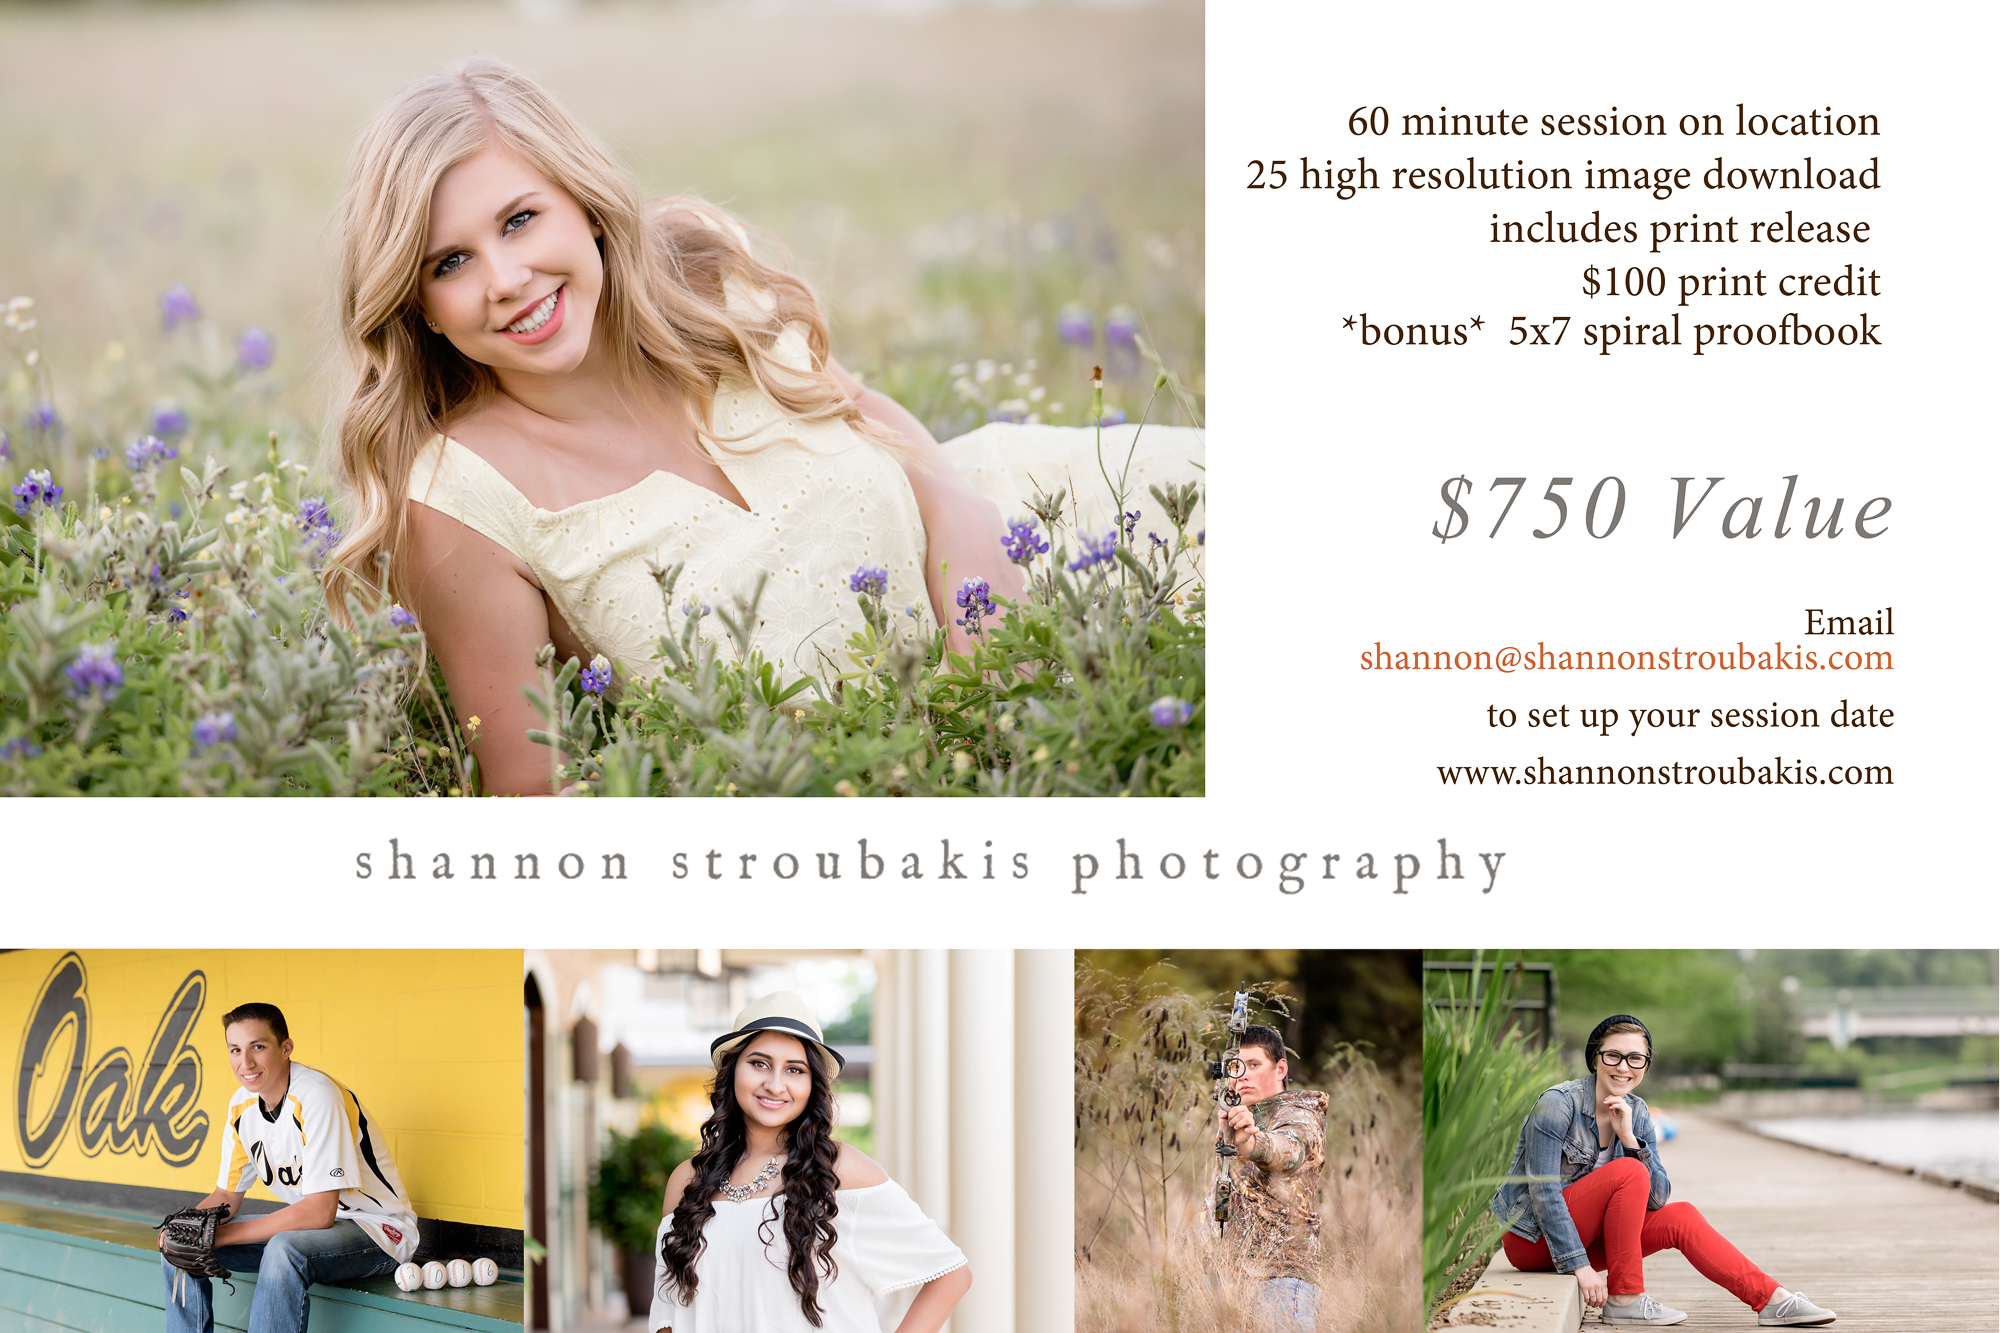 auction offer for senior portraits in the woodlands at a high school gala